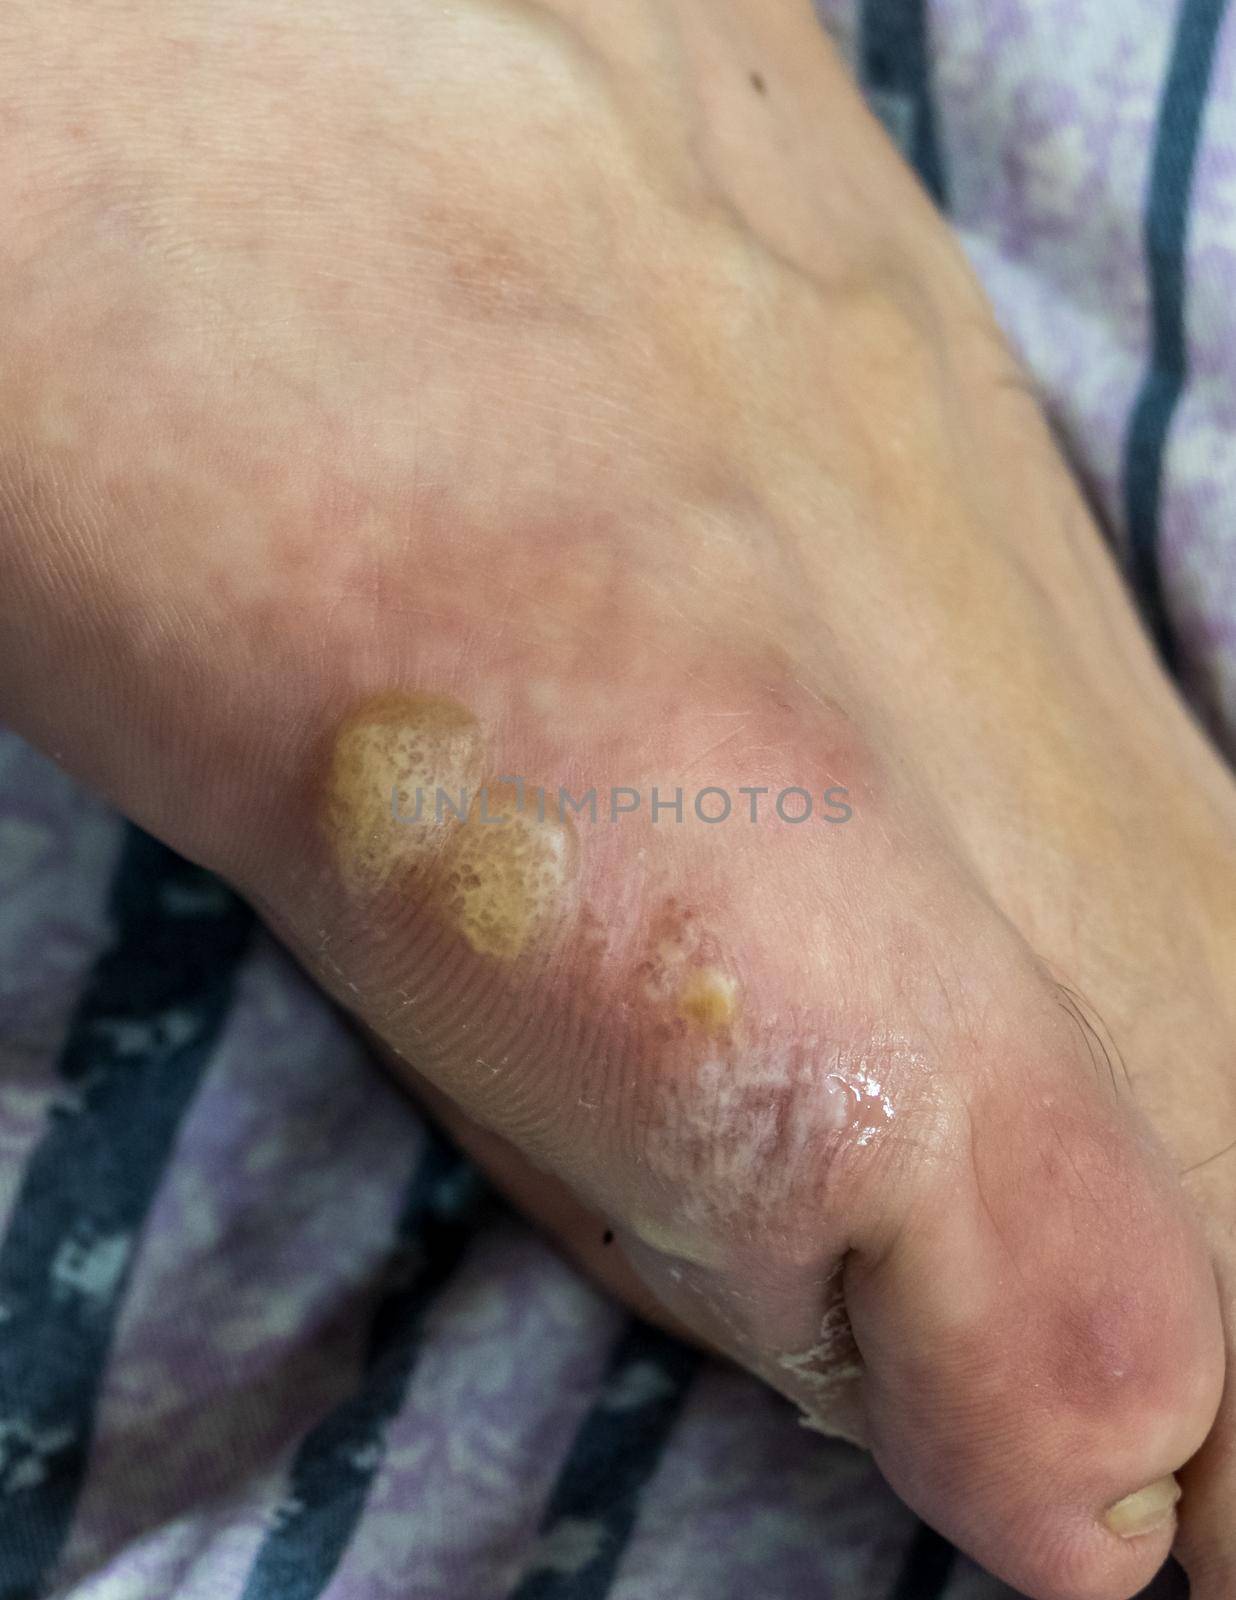 Multiple blisters on foot by imagesbykenny